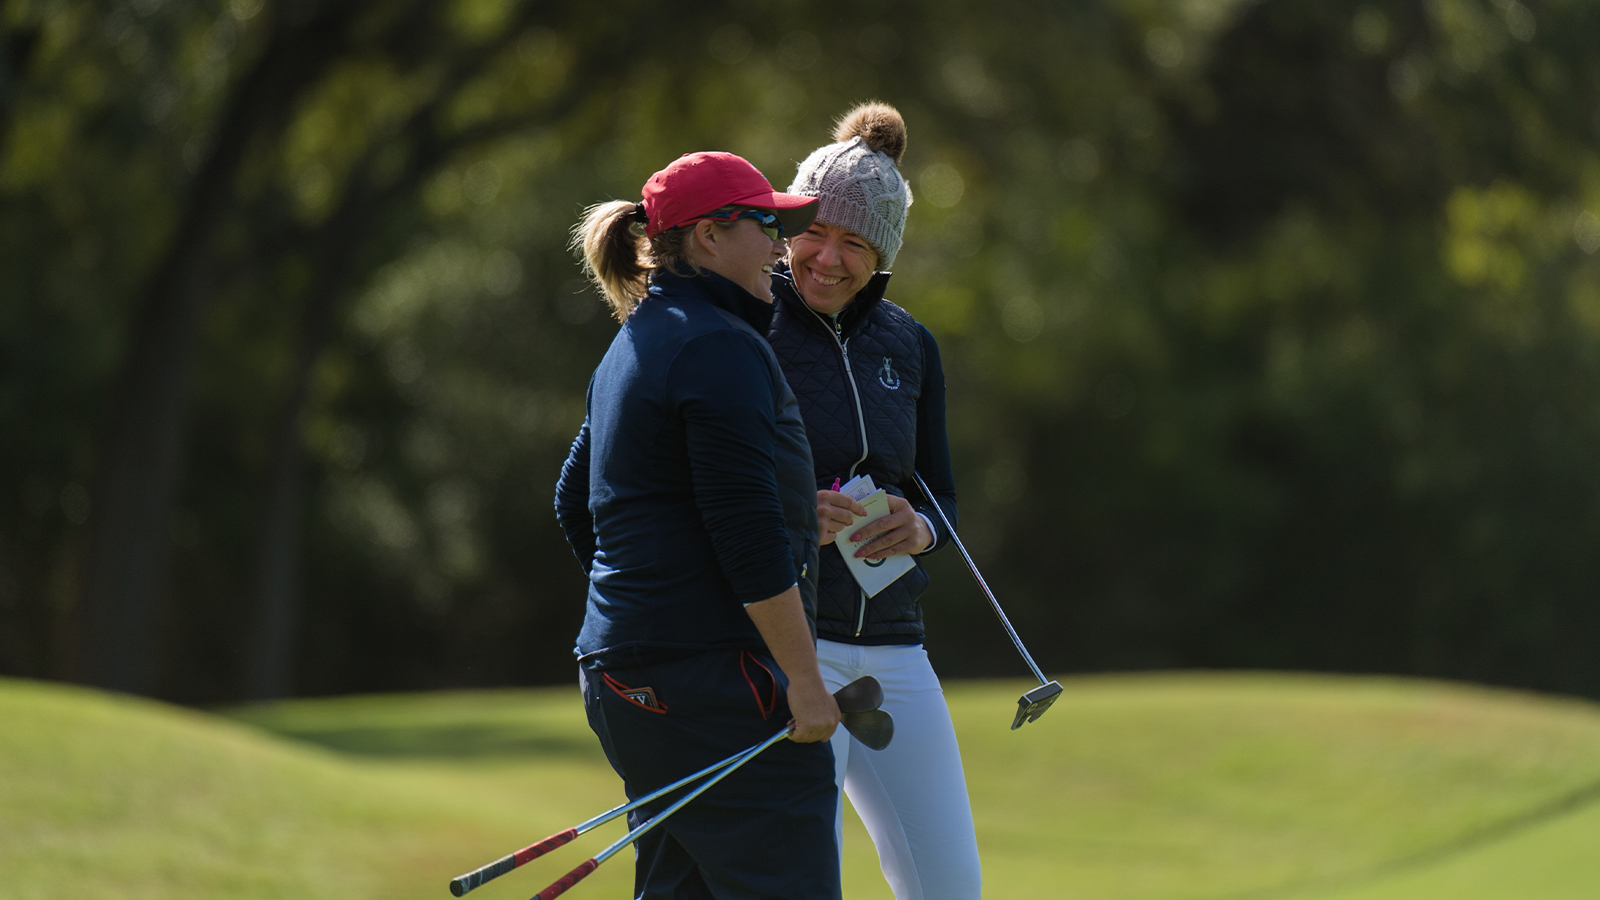 Brittany Kelly of the United States talks to Heather MacRae of Great Britain and Ireland on the 17th hole during the second round for the 2019 Women’s PGA Cup held at the Omni Barton Creek Resort & Spa on October 25, 2019 in Austin, Texas. (Photo by Montana Pritchard/PGA of America)